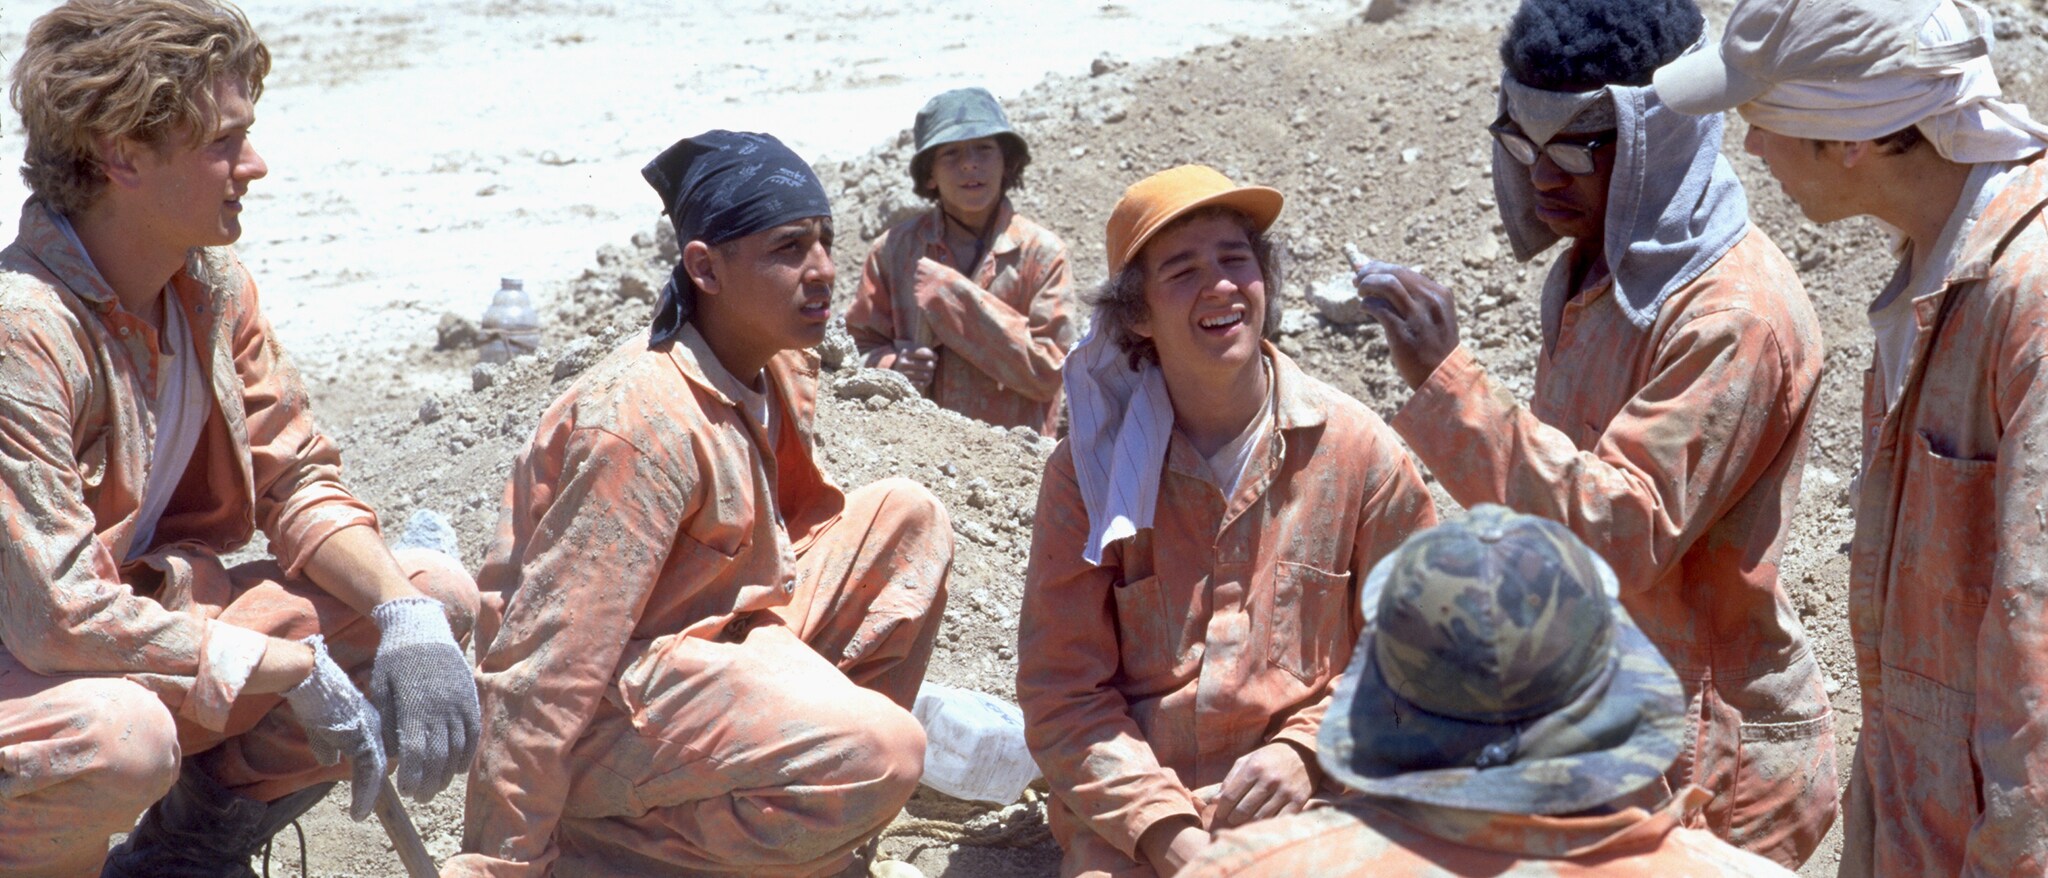 Picture of Holes  Holes movie, Holes, Louis sachar